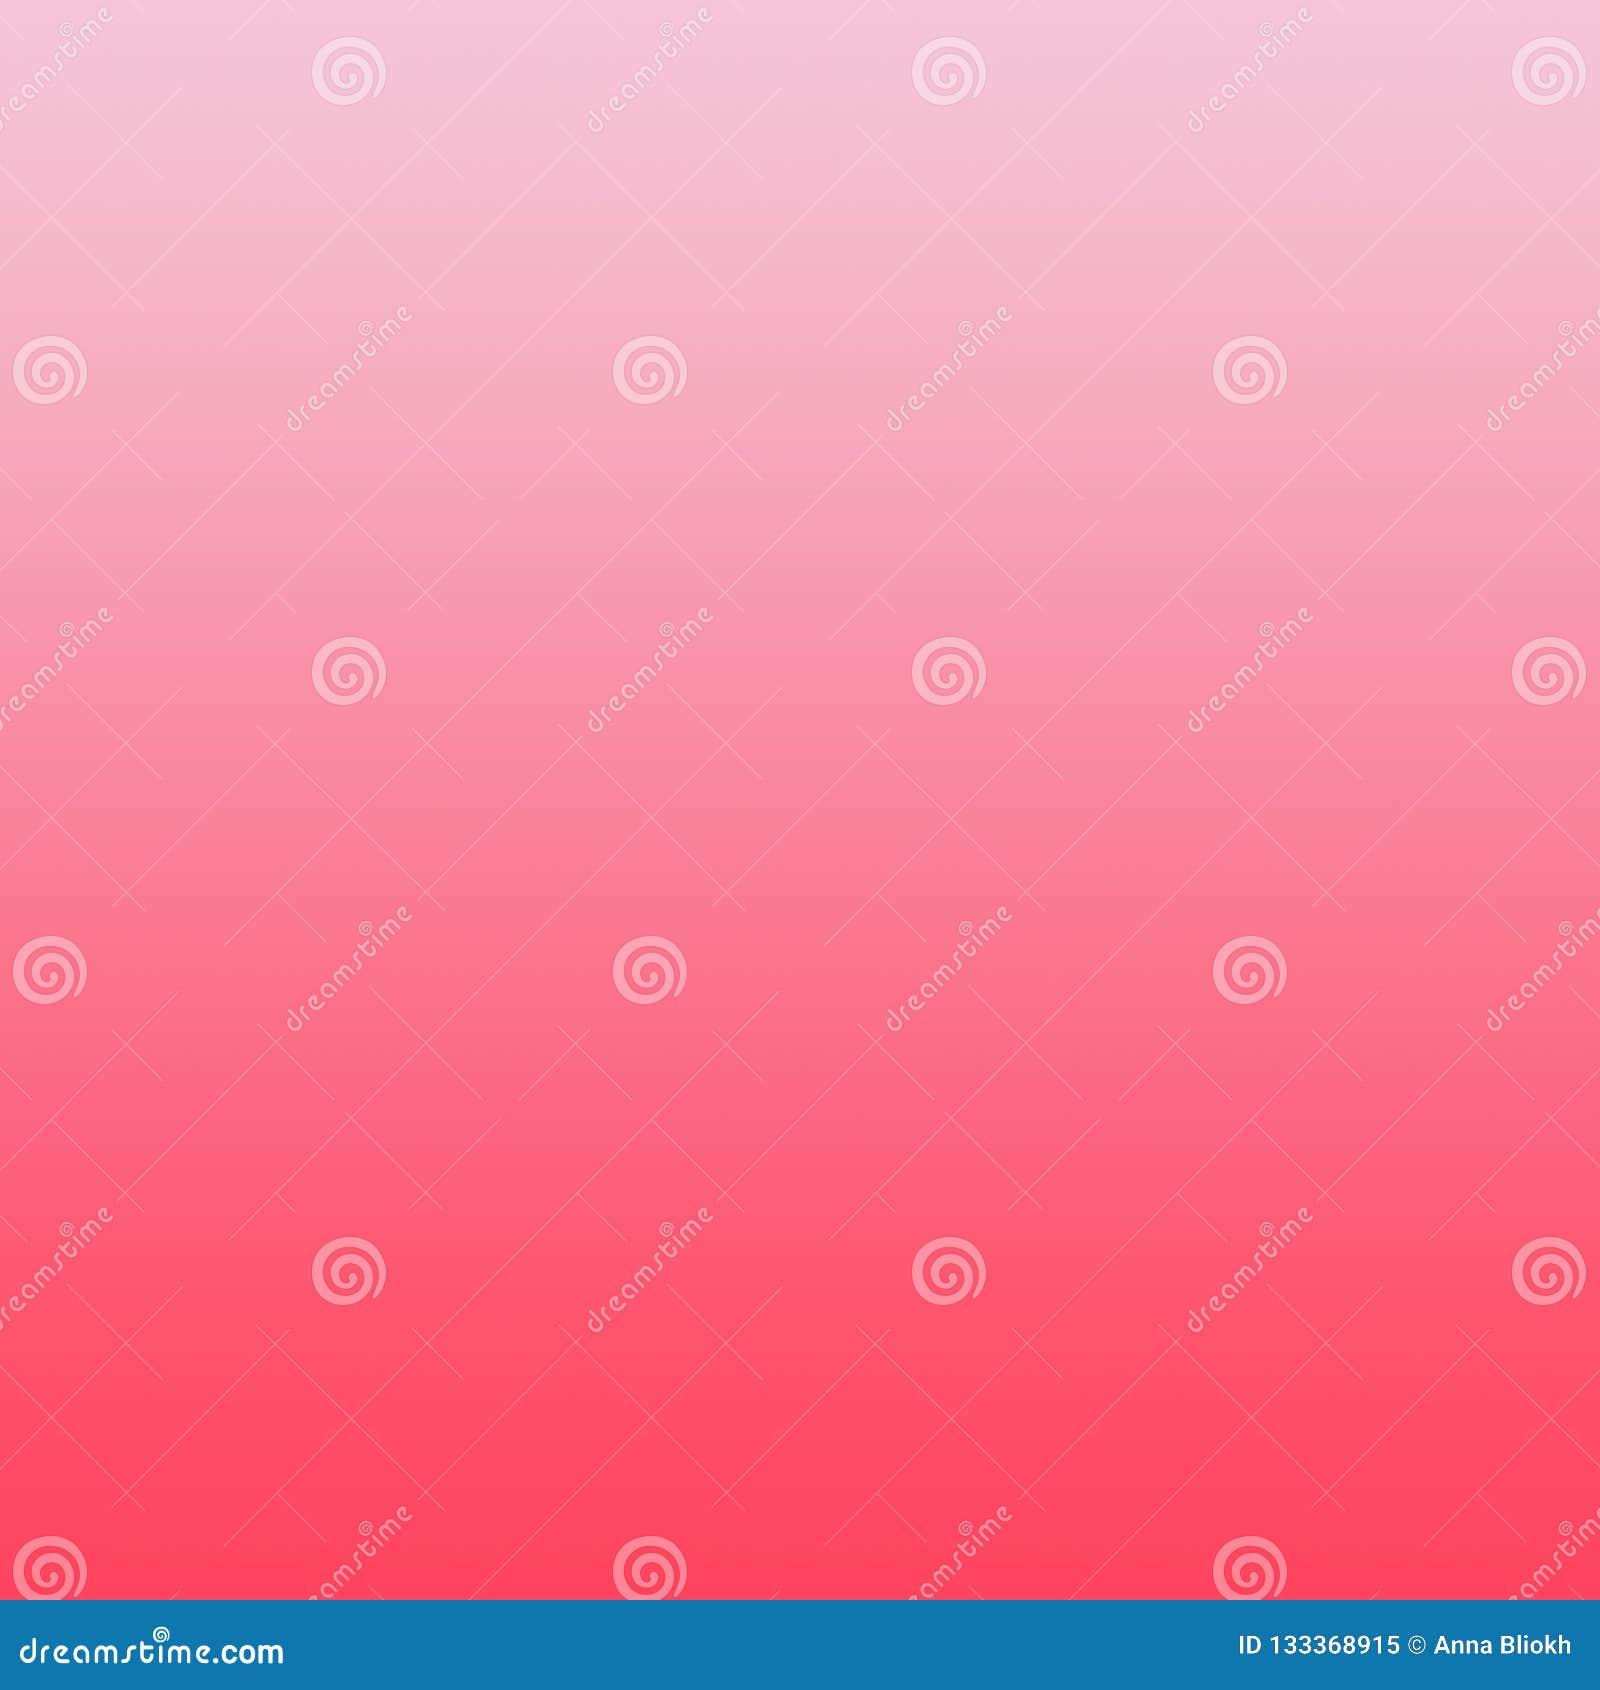 Pink Pastel Background Images, HD Pictures and Wallpaper For Free Download  | Pngtree